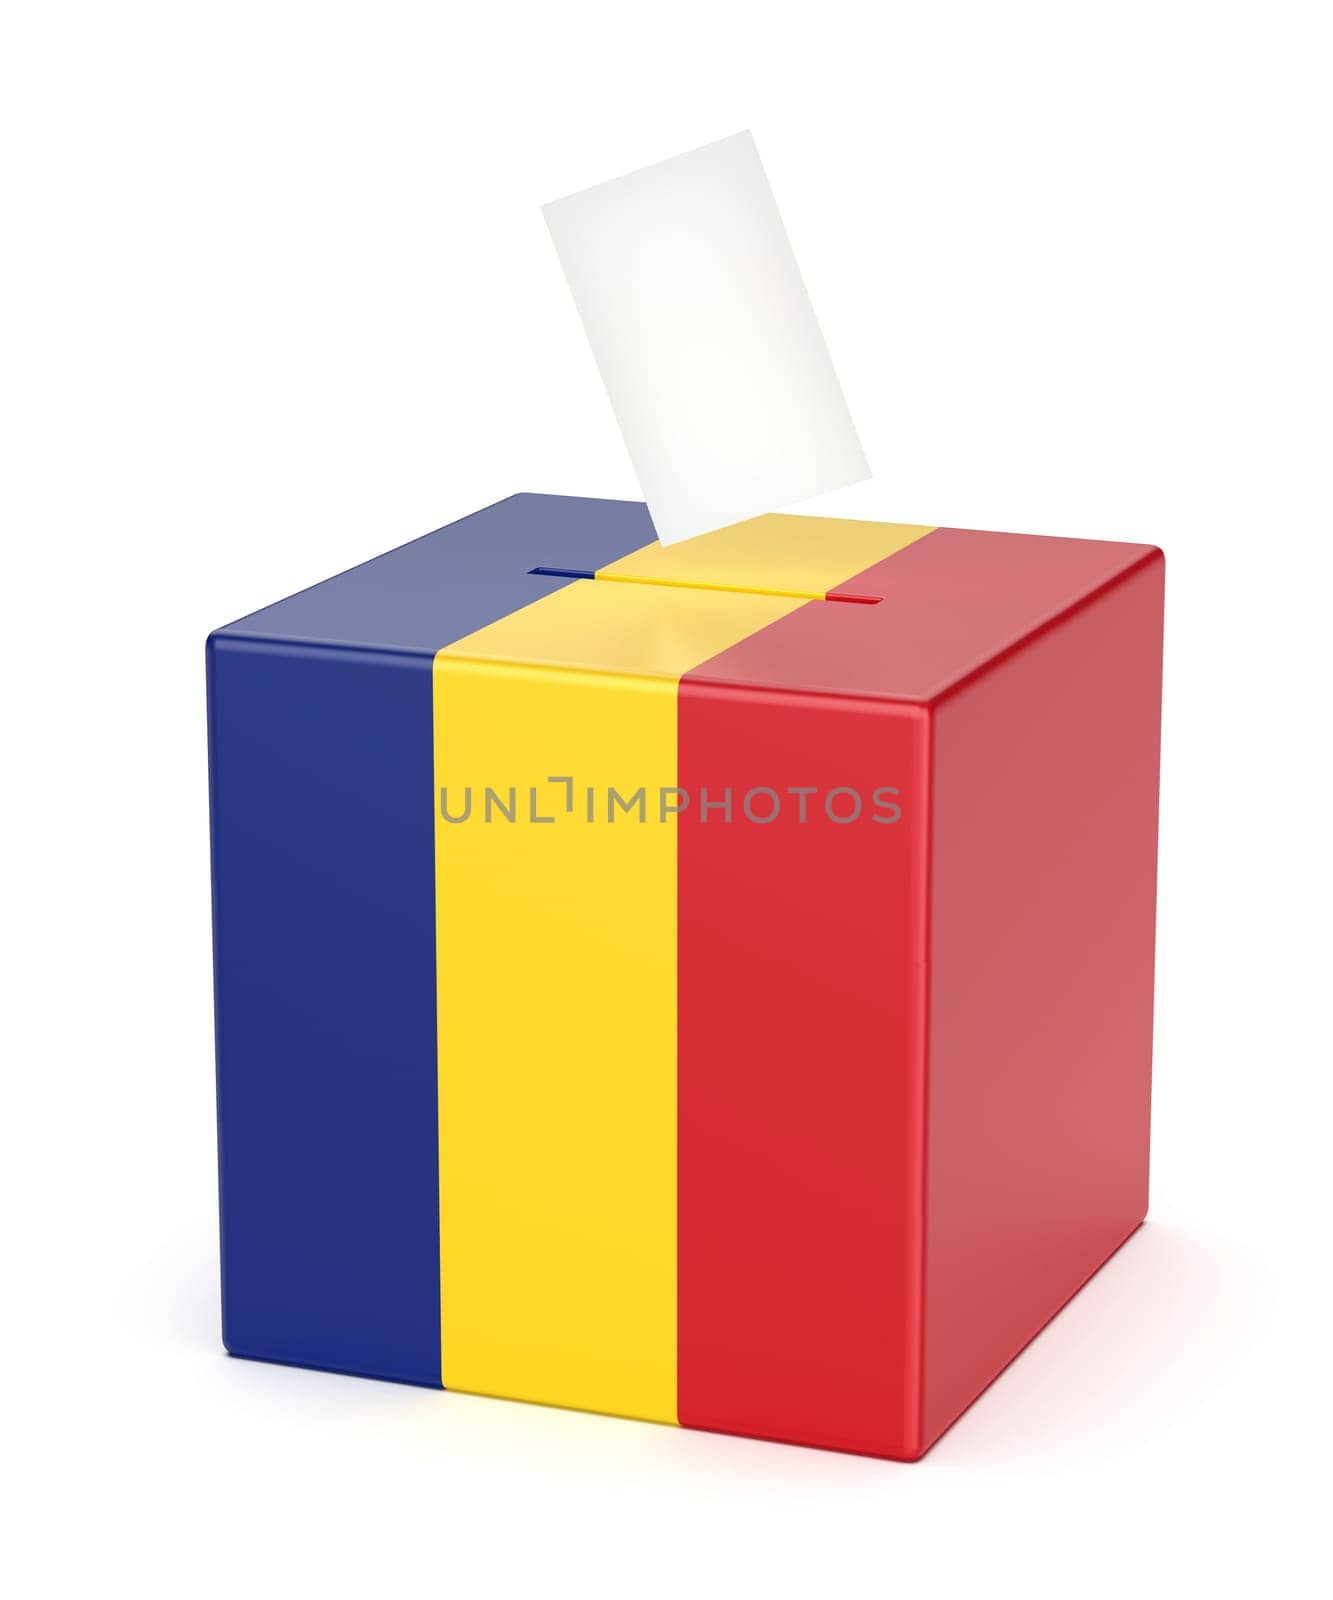 Concept image for election in Romania, ballot box with voting paper